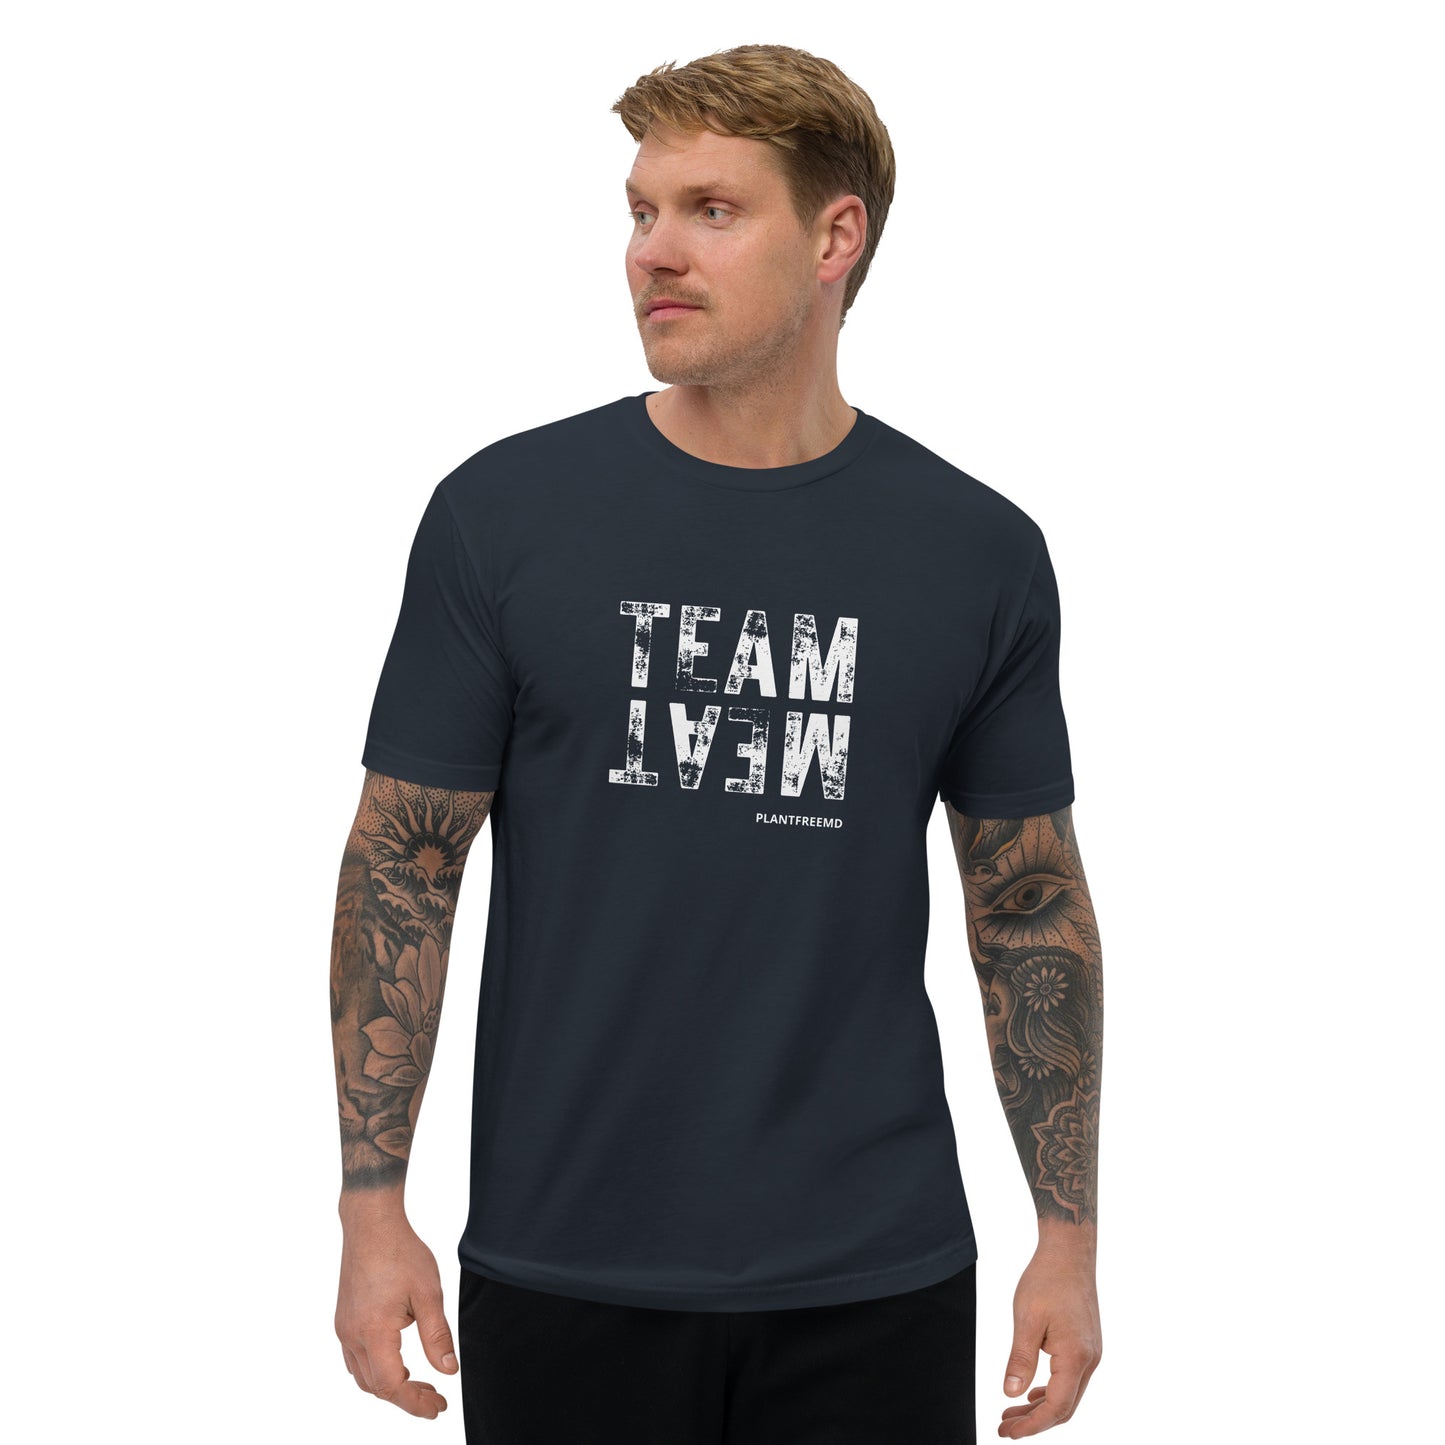 Team Meat Men's Fitted T-shirt